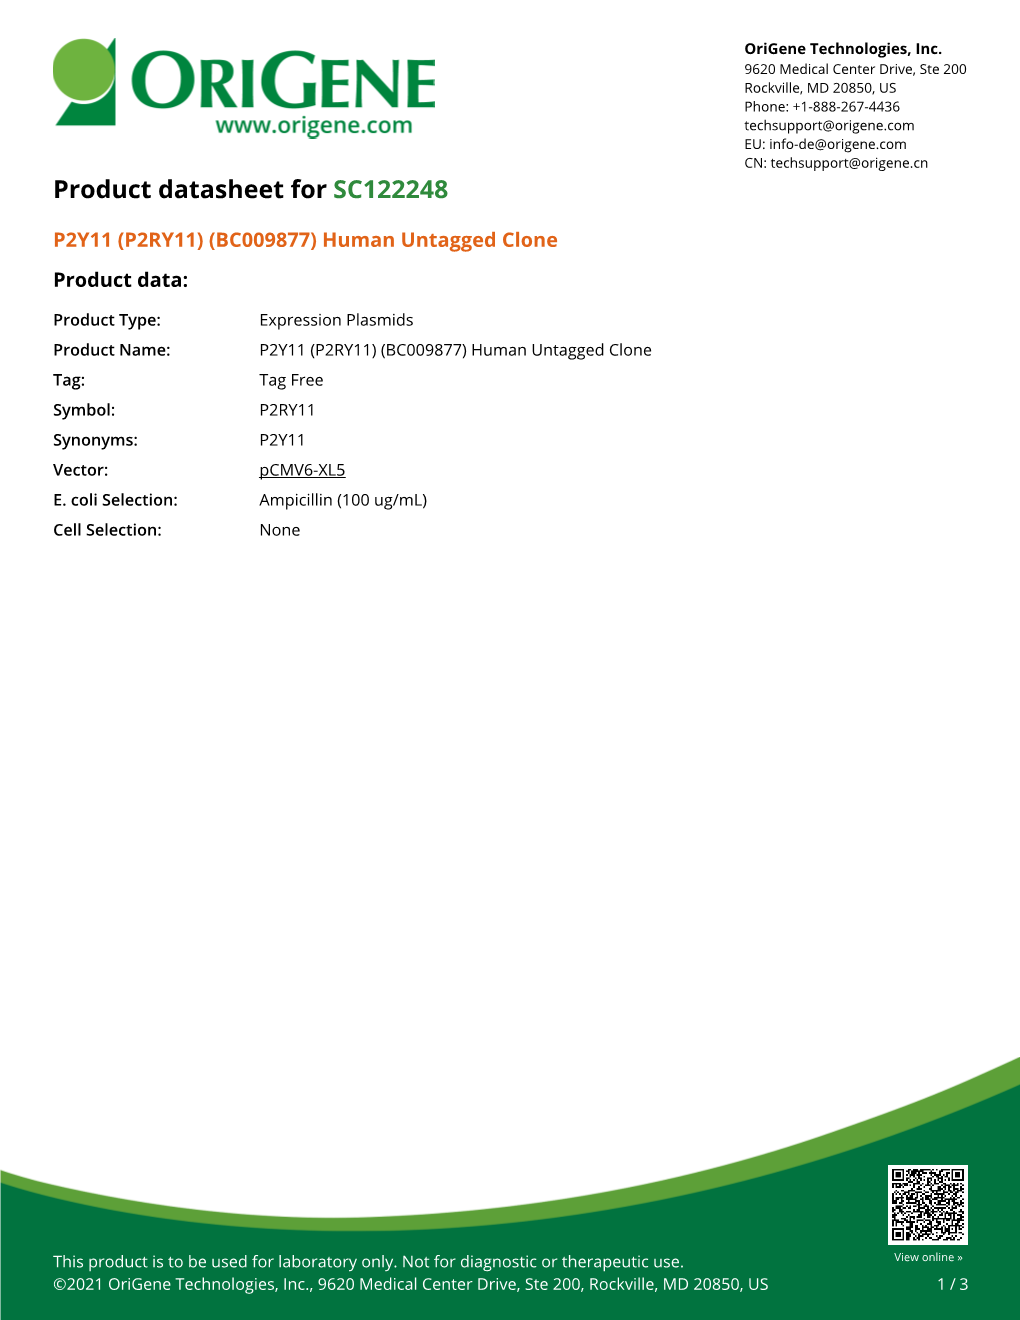 P2Y11 (P2RY11) (BC009877) Human Untagged Clone Product Data